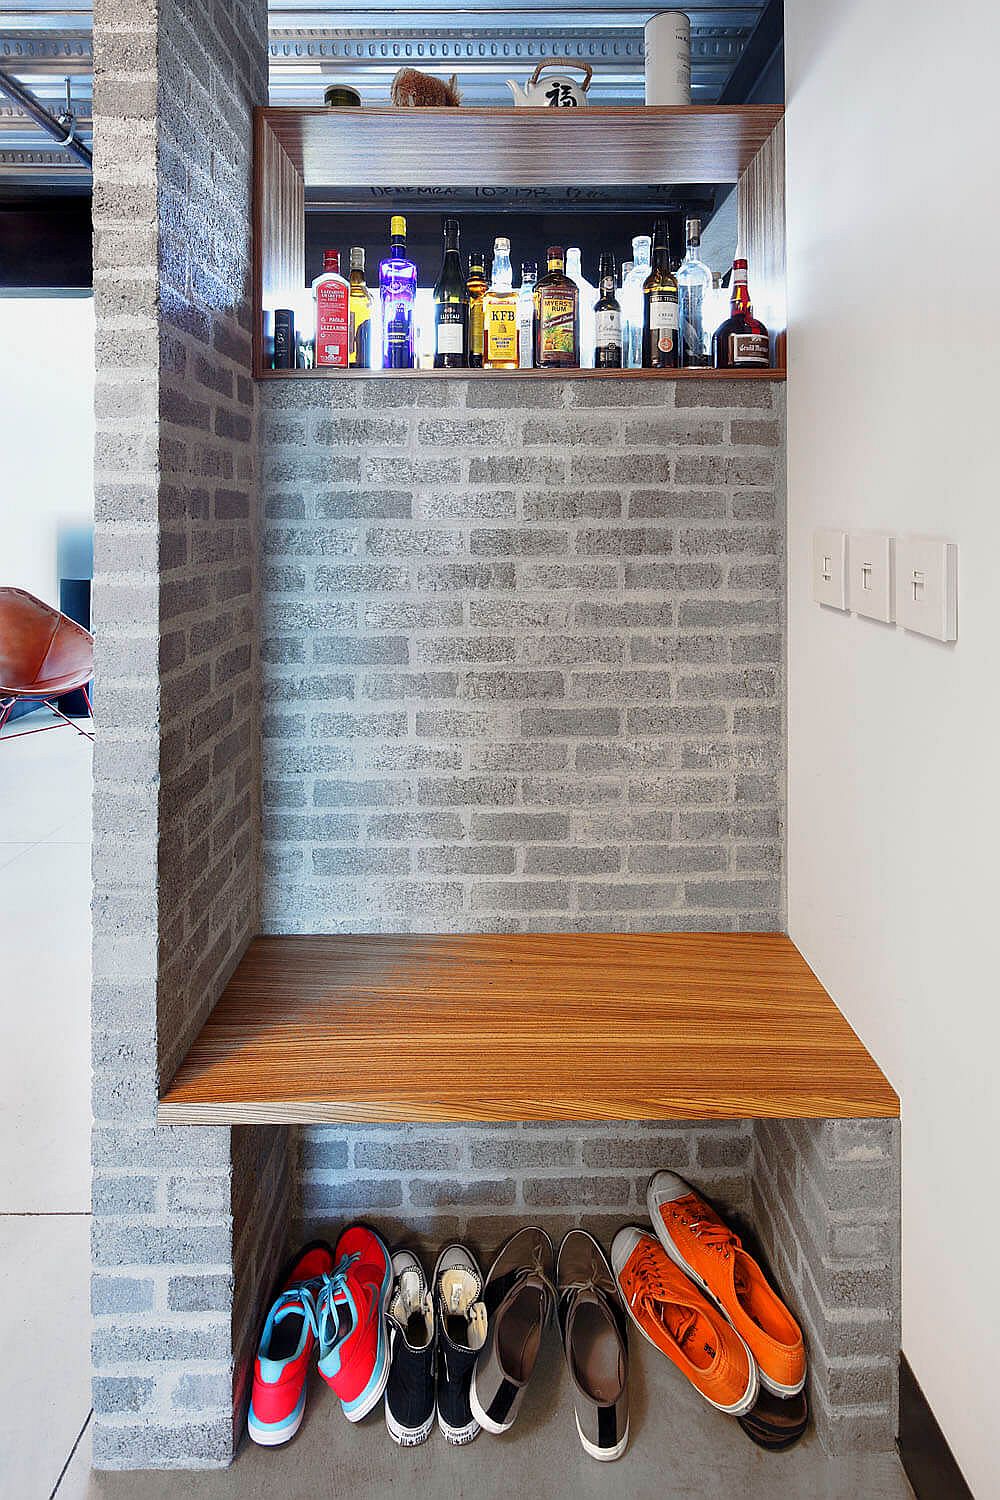 Use-of-concrete-bricks-inside-the-loft-accentuates-its-industrial-appeal-58770